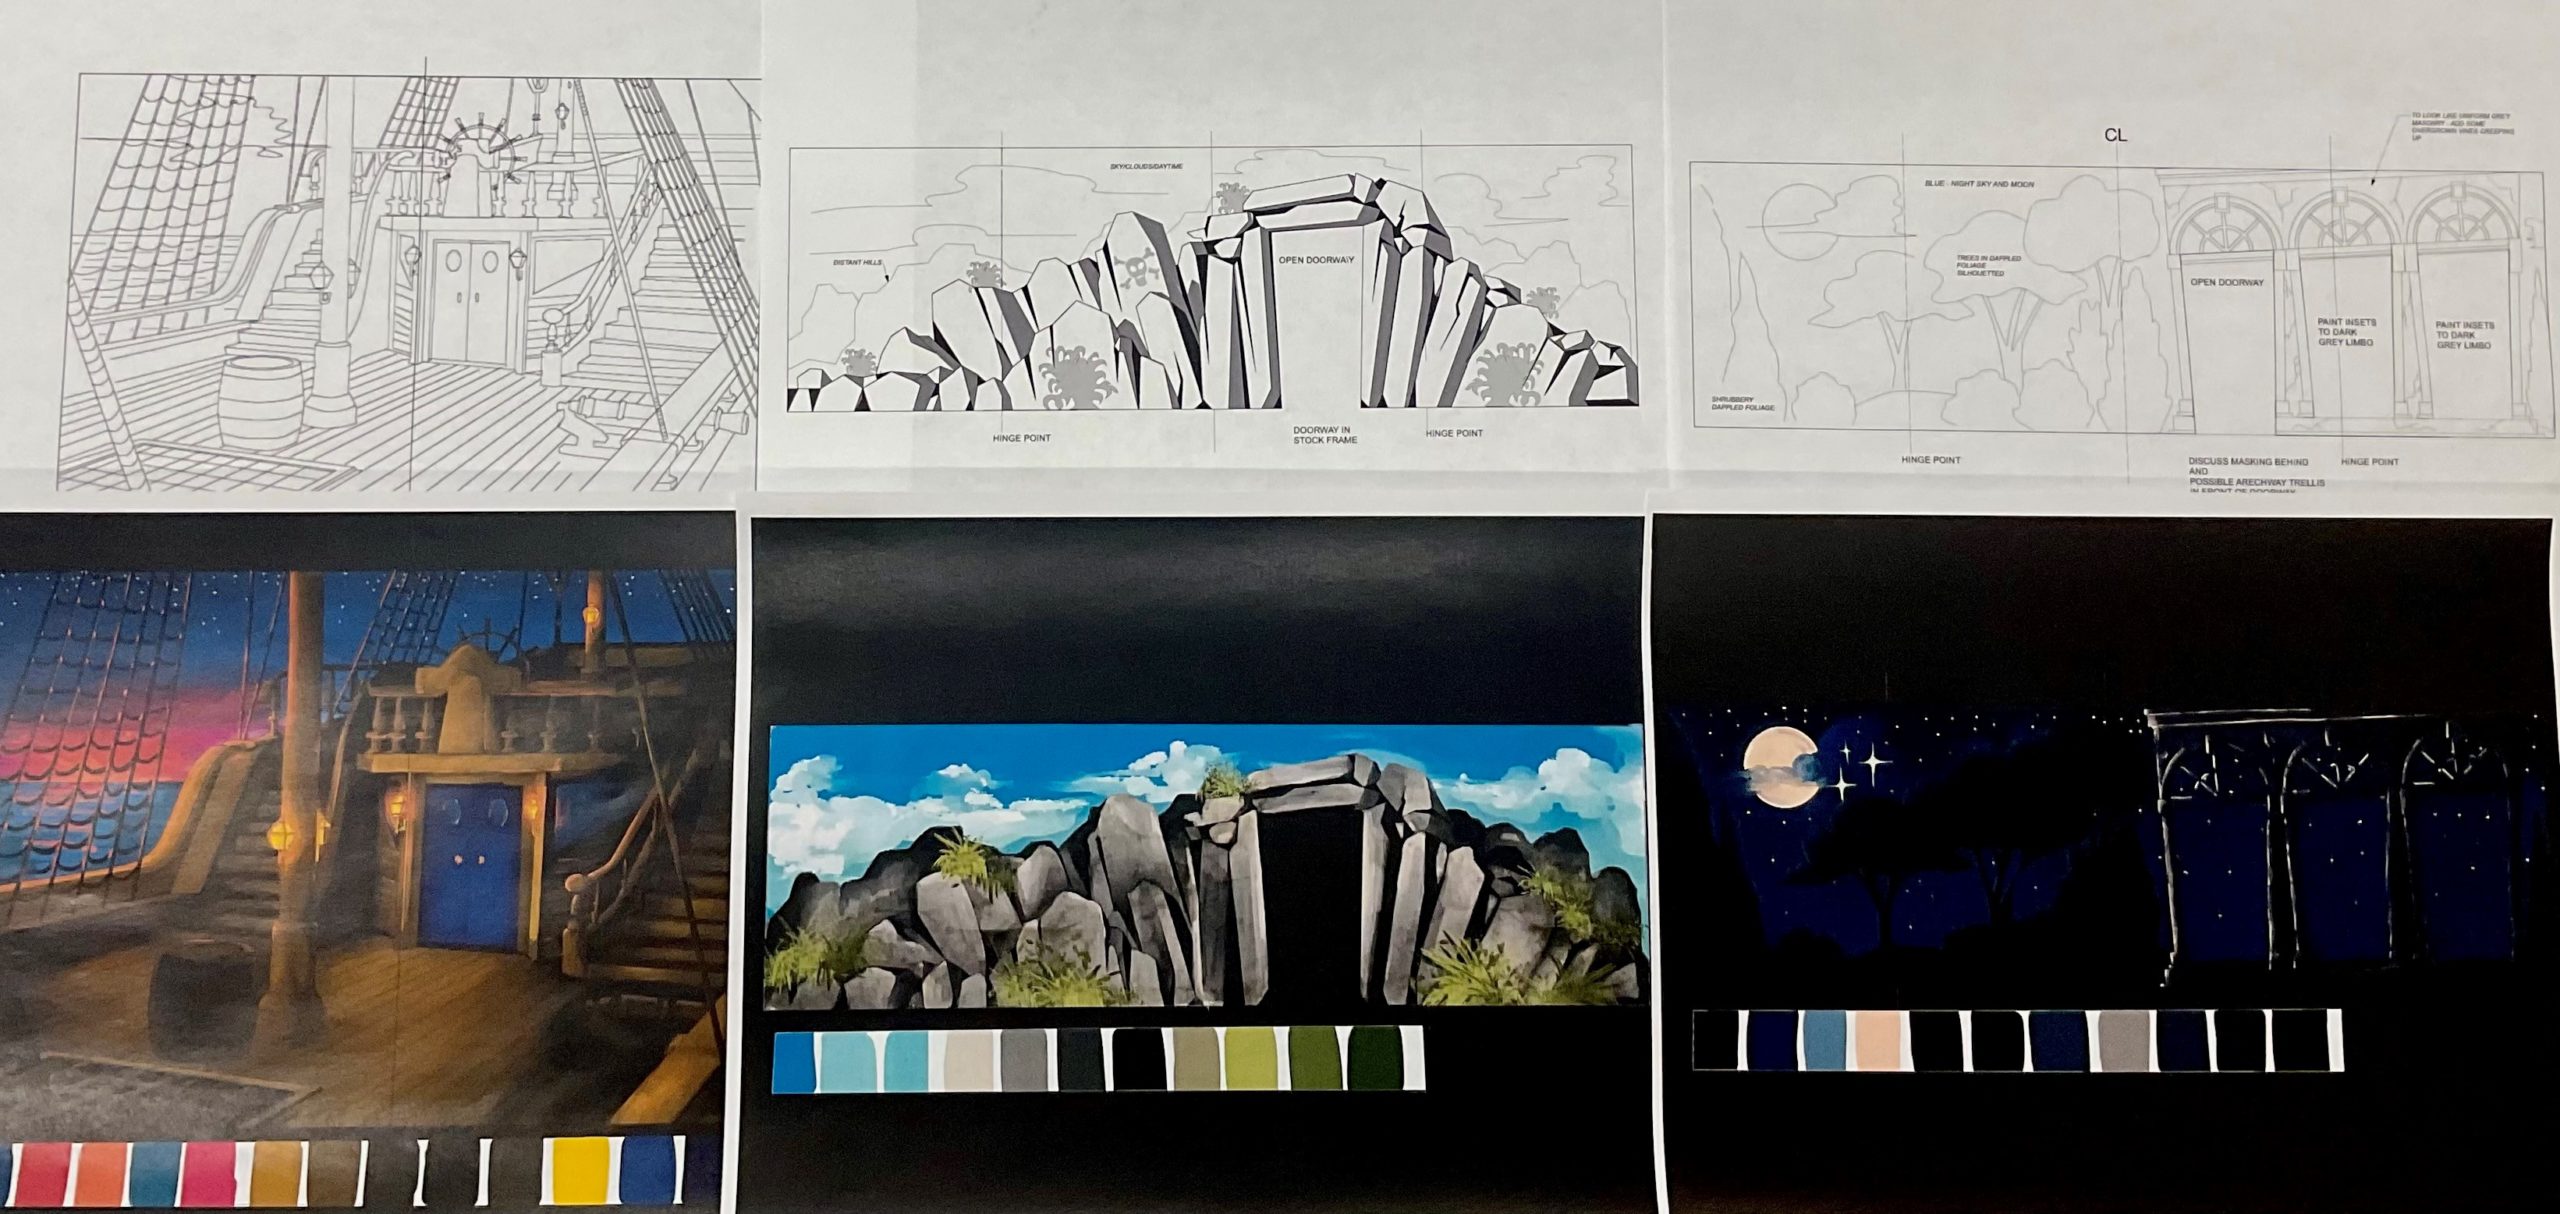 Black and white images of the three sets for The Pirates of Penzance juxtaposed with the same sets painted in full color with the pallet below.